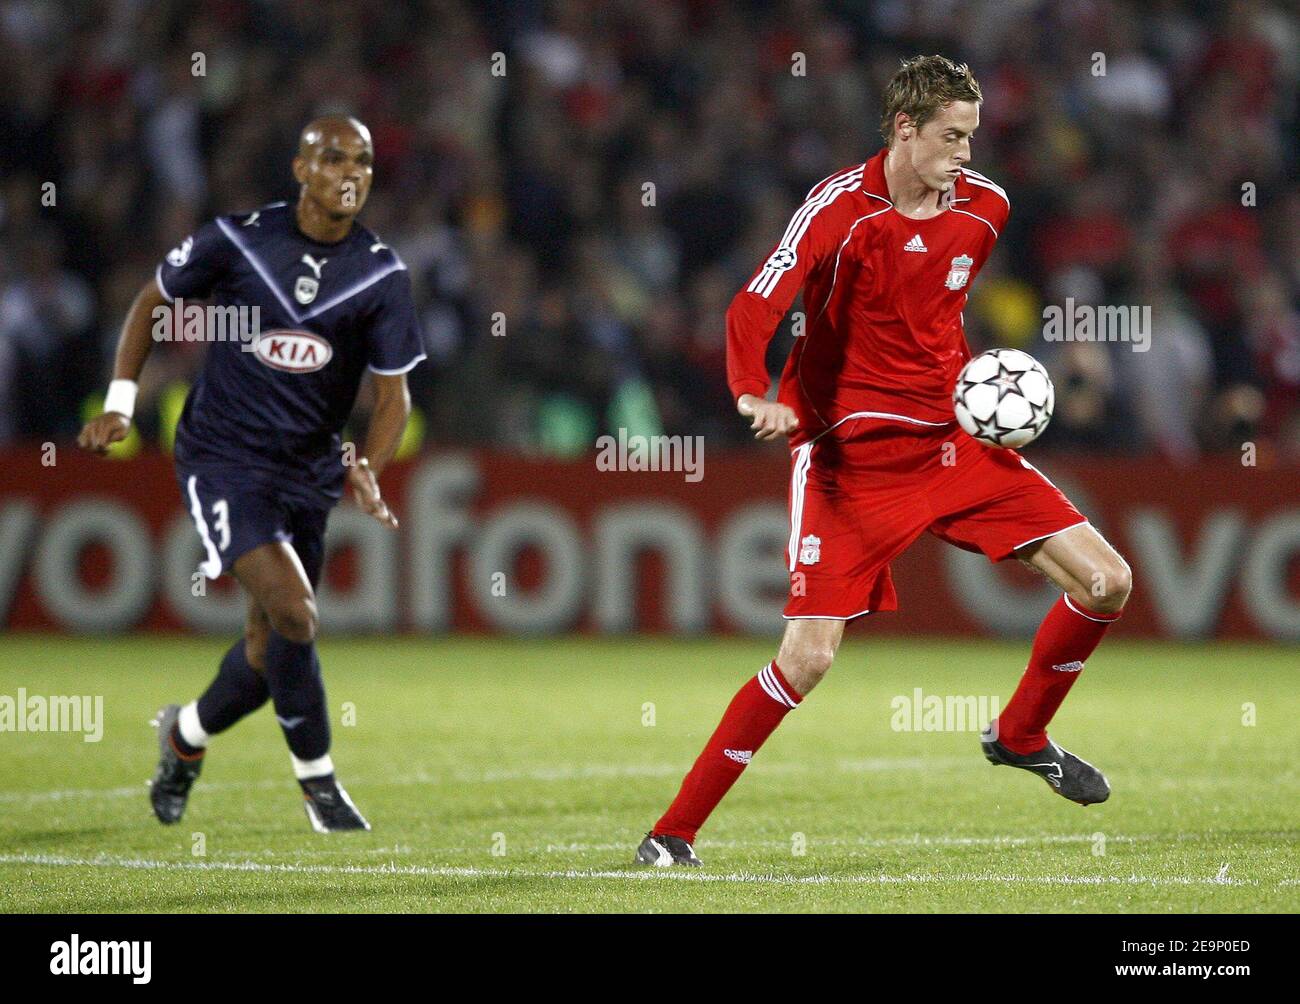 Bordeaux' Peter Crouch in action during the UEFA Champions League, Group C, Girondins de Bordeaux vs Liverpool FC at the Stade Chaban-Delmas in Bordeaux, France on October 18, 2006. Liverpool won 1-0. Photo by Christian Liewig/ABACAPRESS.COM Stock Photo